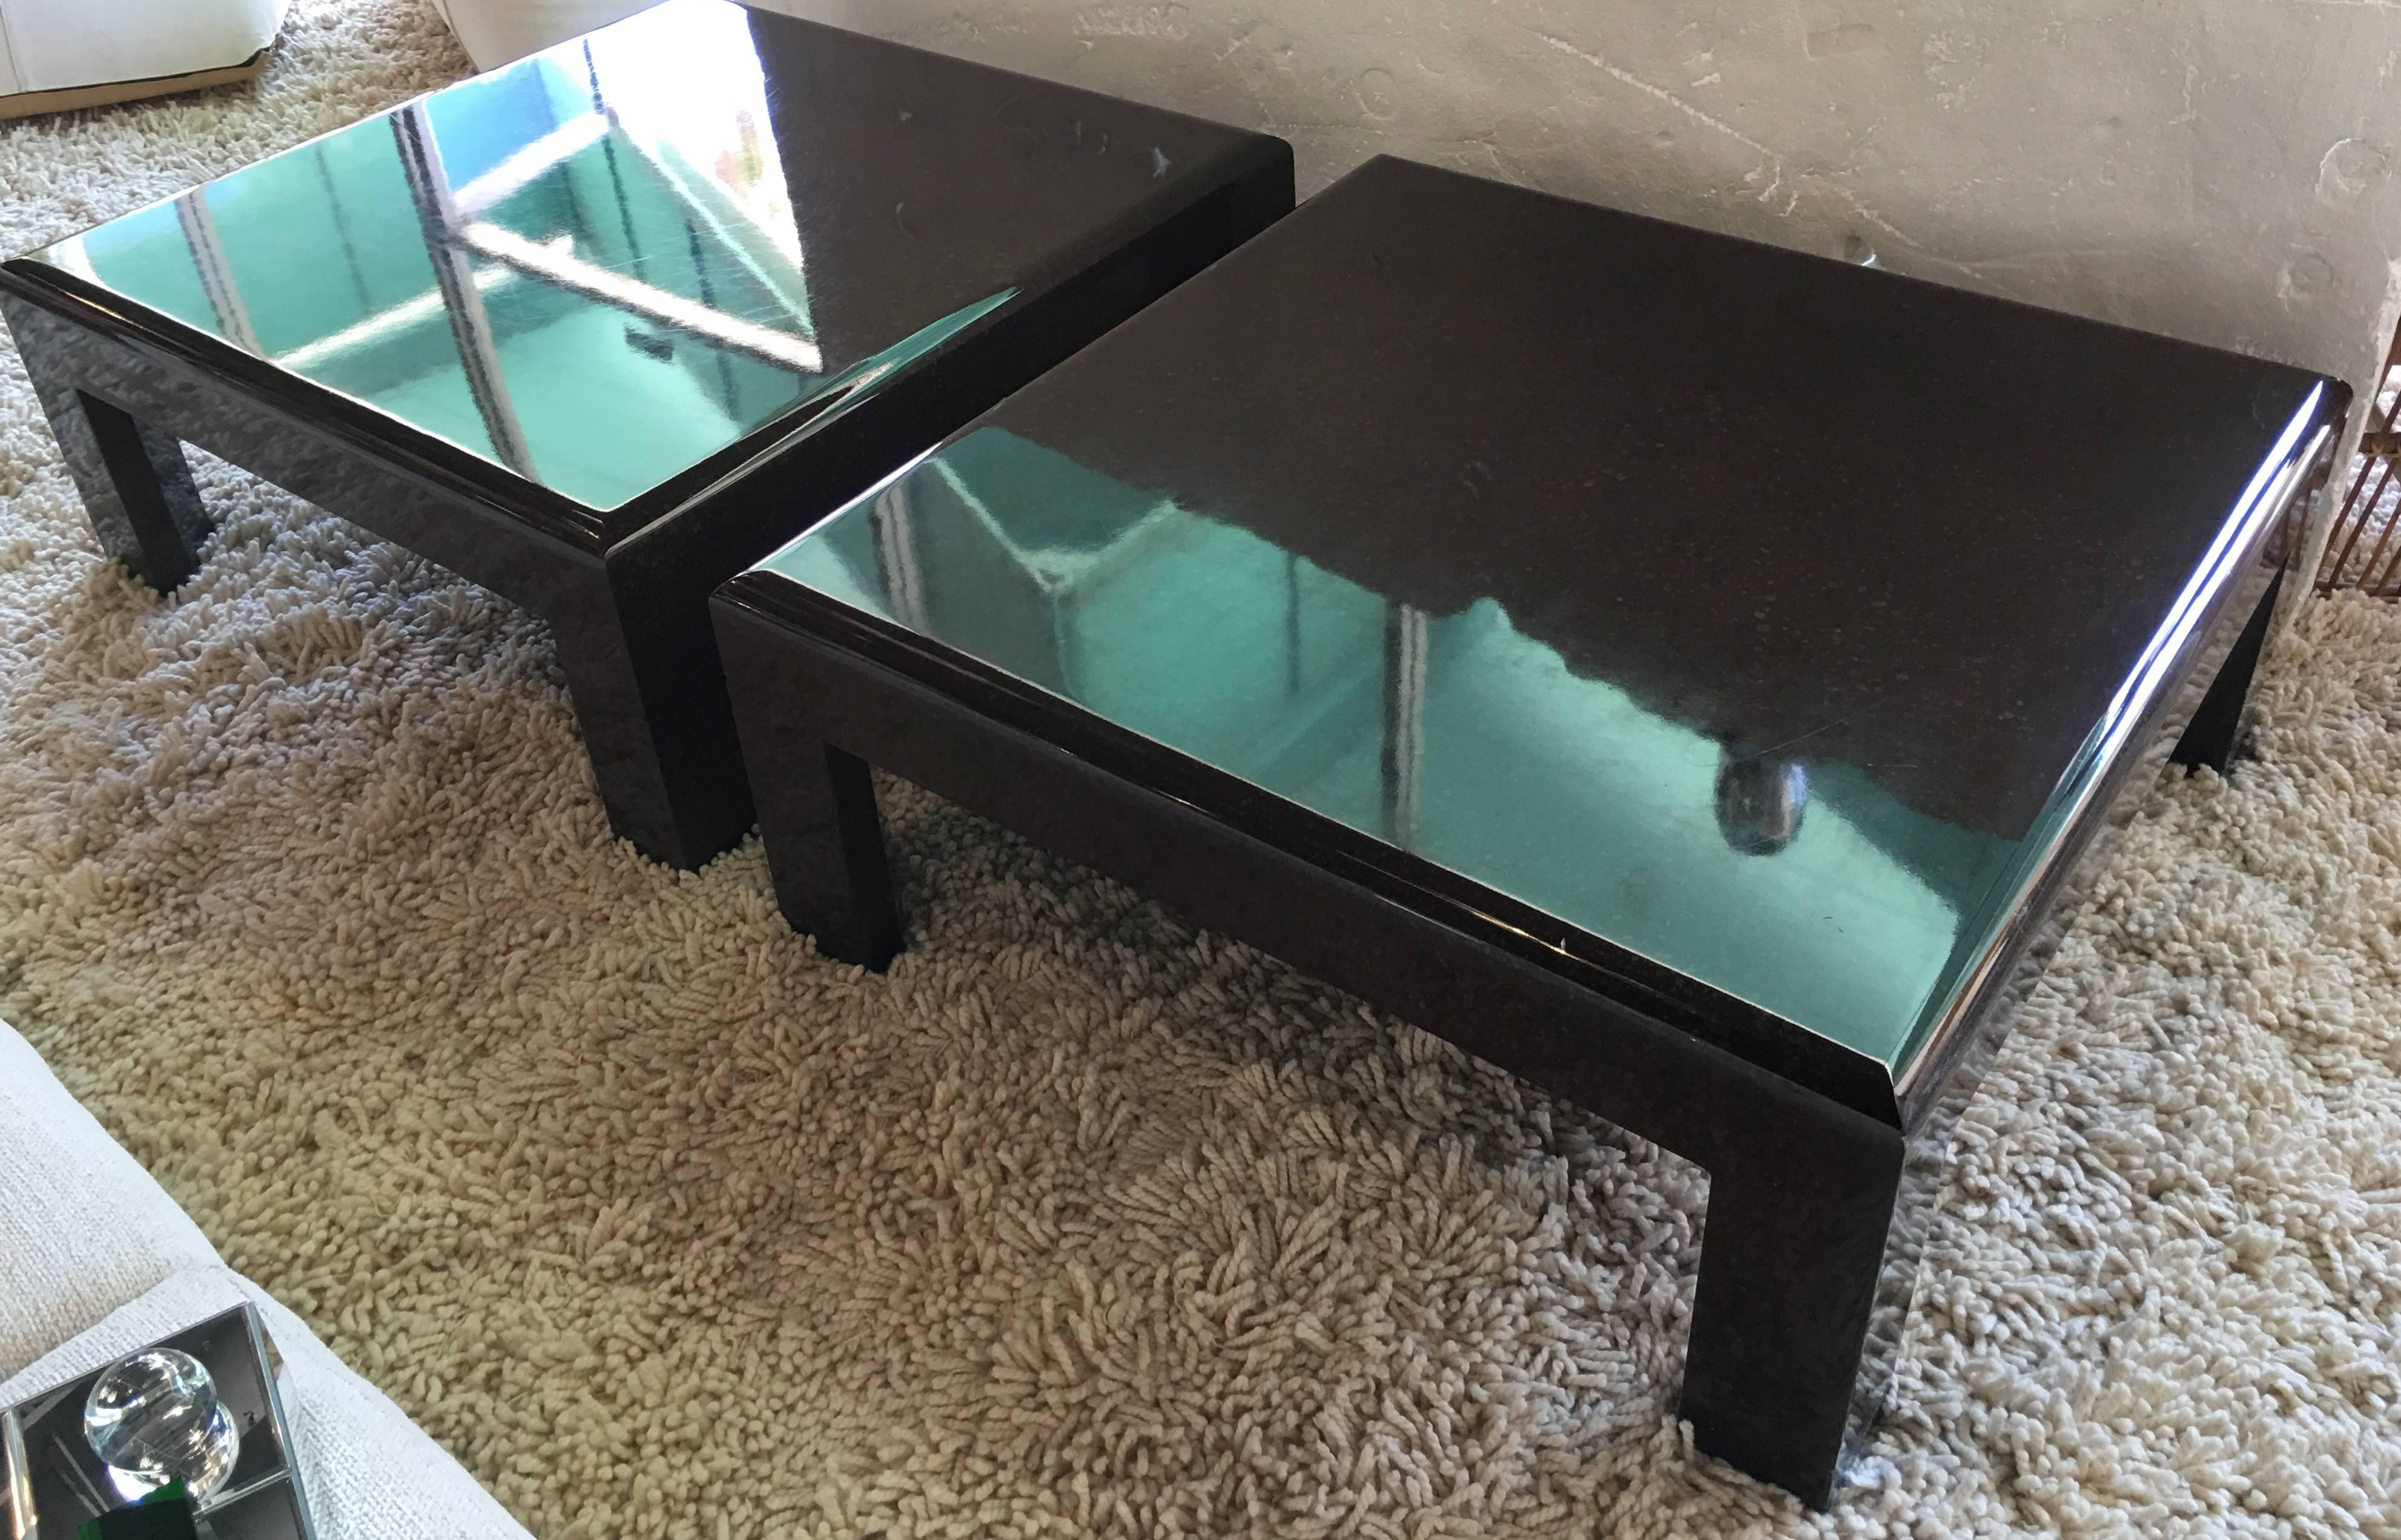 From a very prestigious estate in Indian Wells, Ca are a custom-made rare pair of high gloss lacquer coffee tables. Beautiful brown with a oil spatter custom finish. Extremely chic and very luxe modern. In the style of Sally Sirkin Lewis that did